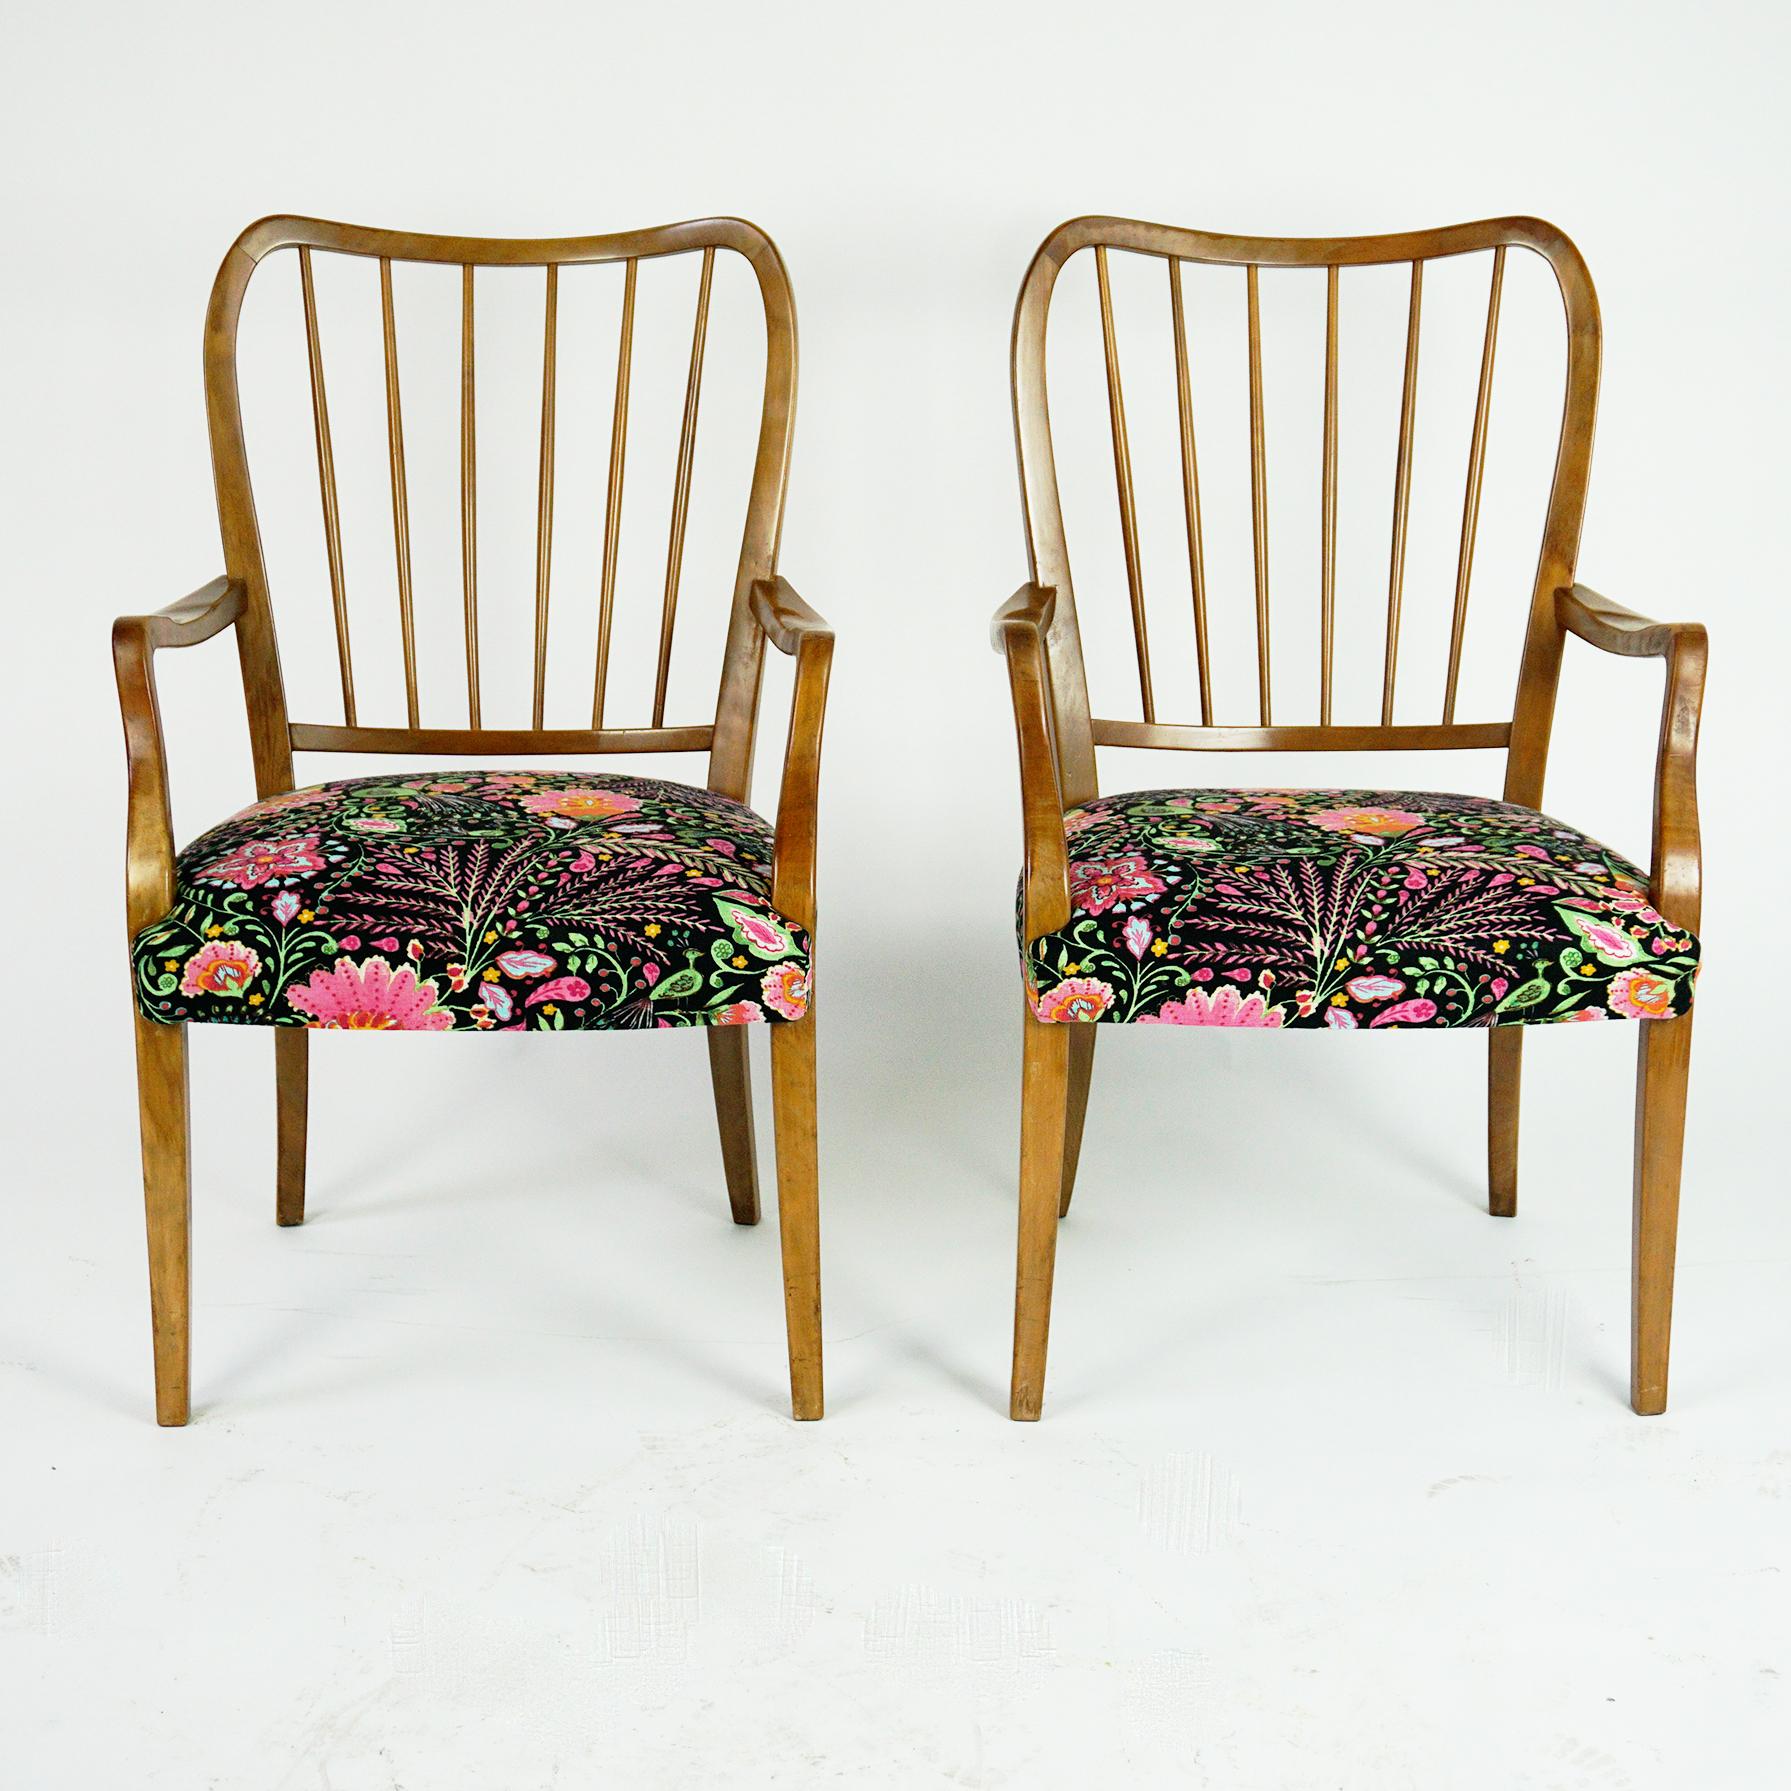 This elegant and comfortable pair of dining armchairs was designed by the Austrian architect and designer Oswald Haerdtl and manufactured in the 1950s in Vienna. 
The sculpted Chairs are made of Walnut and have seats with renewed Flower fabric.